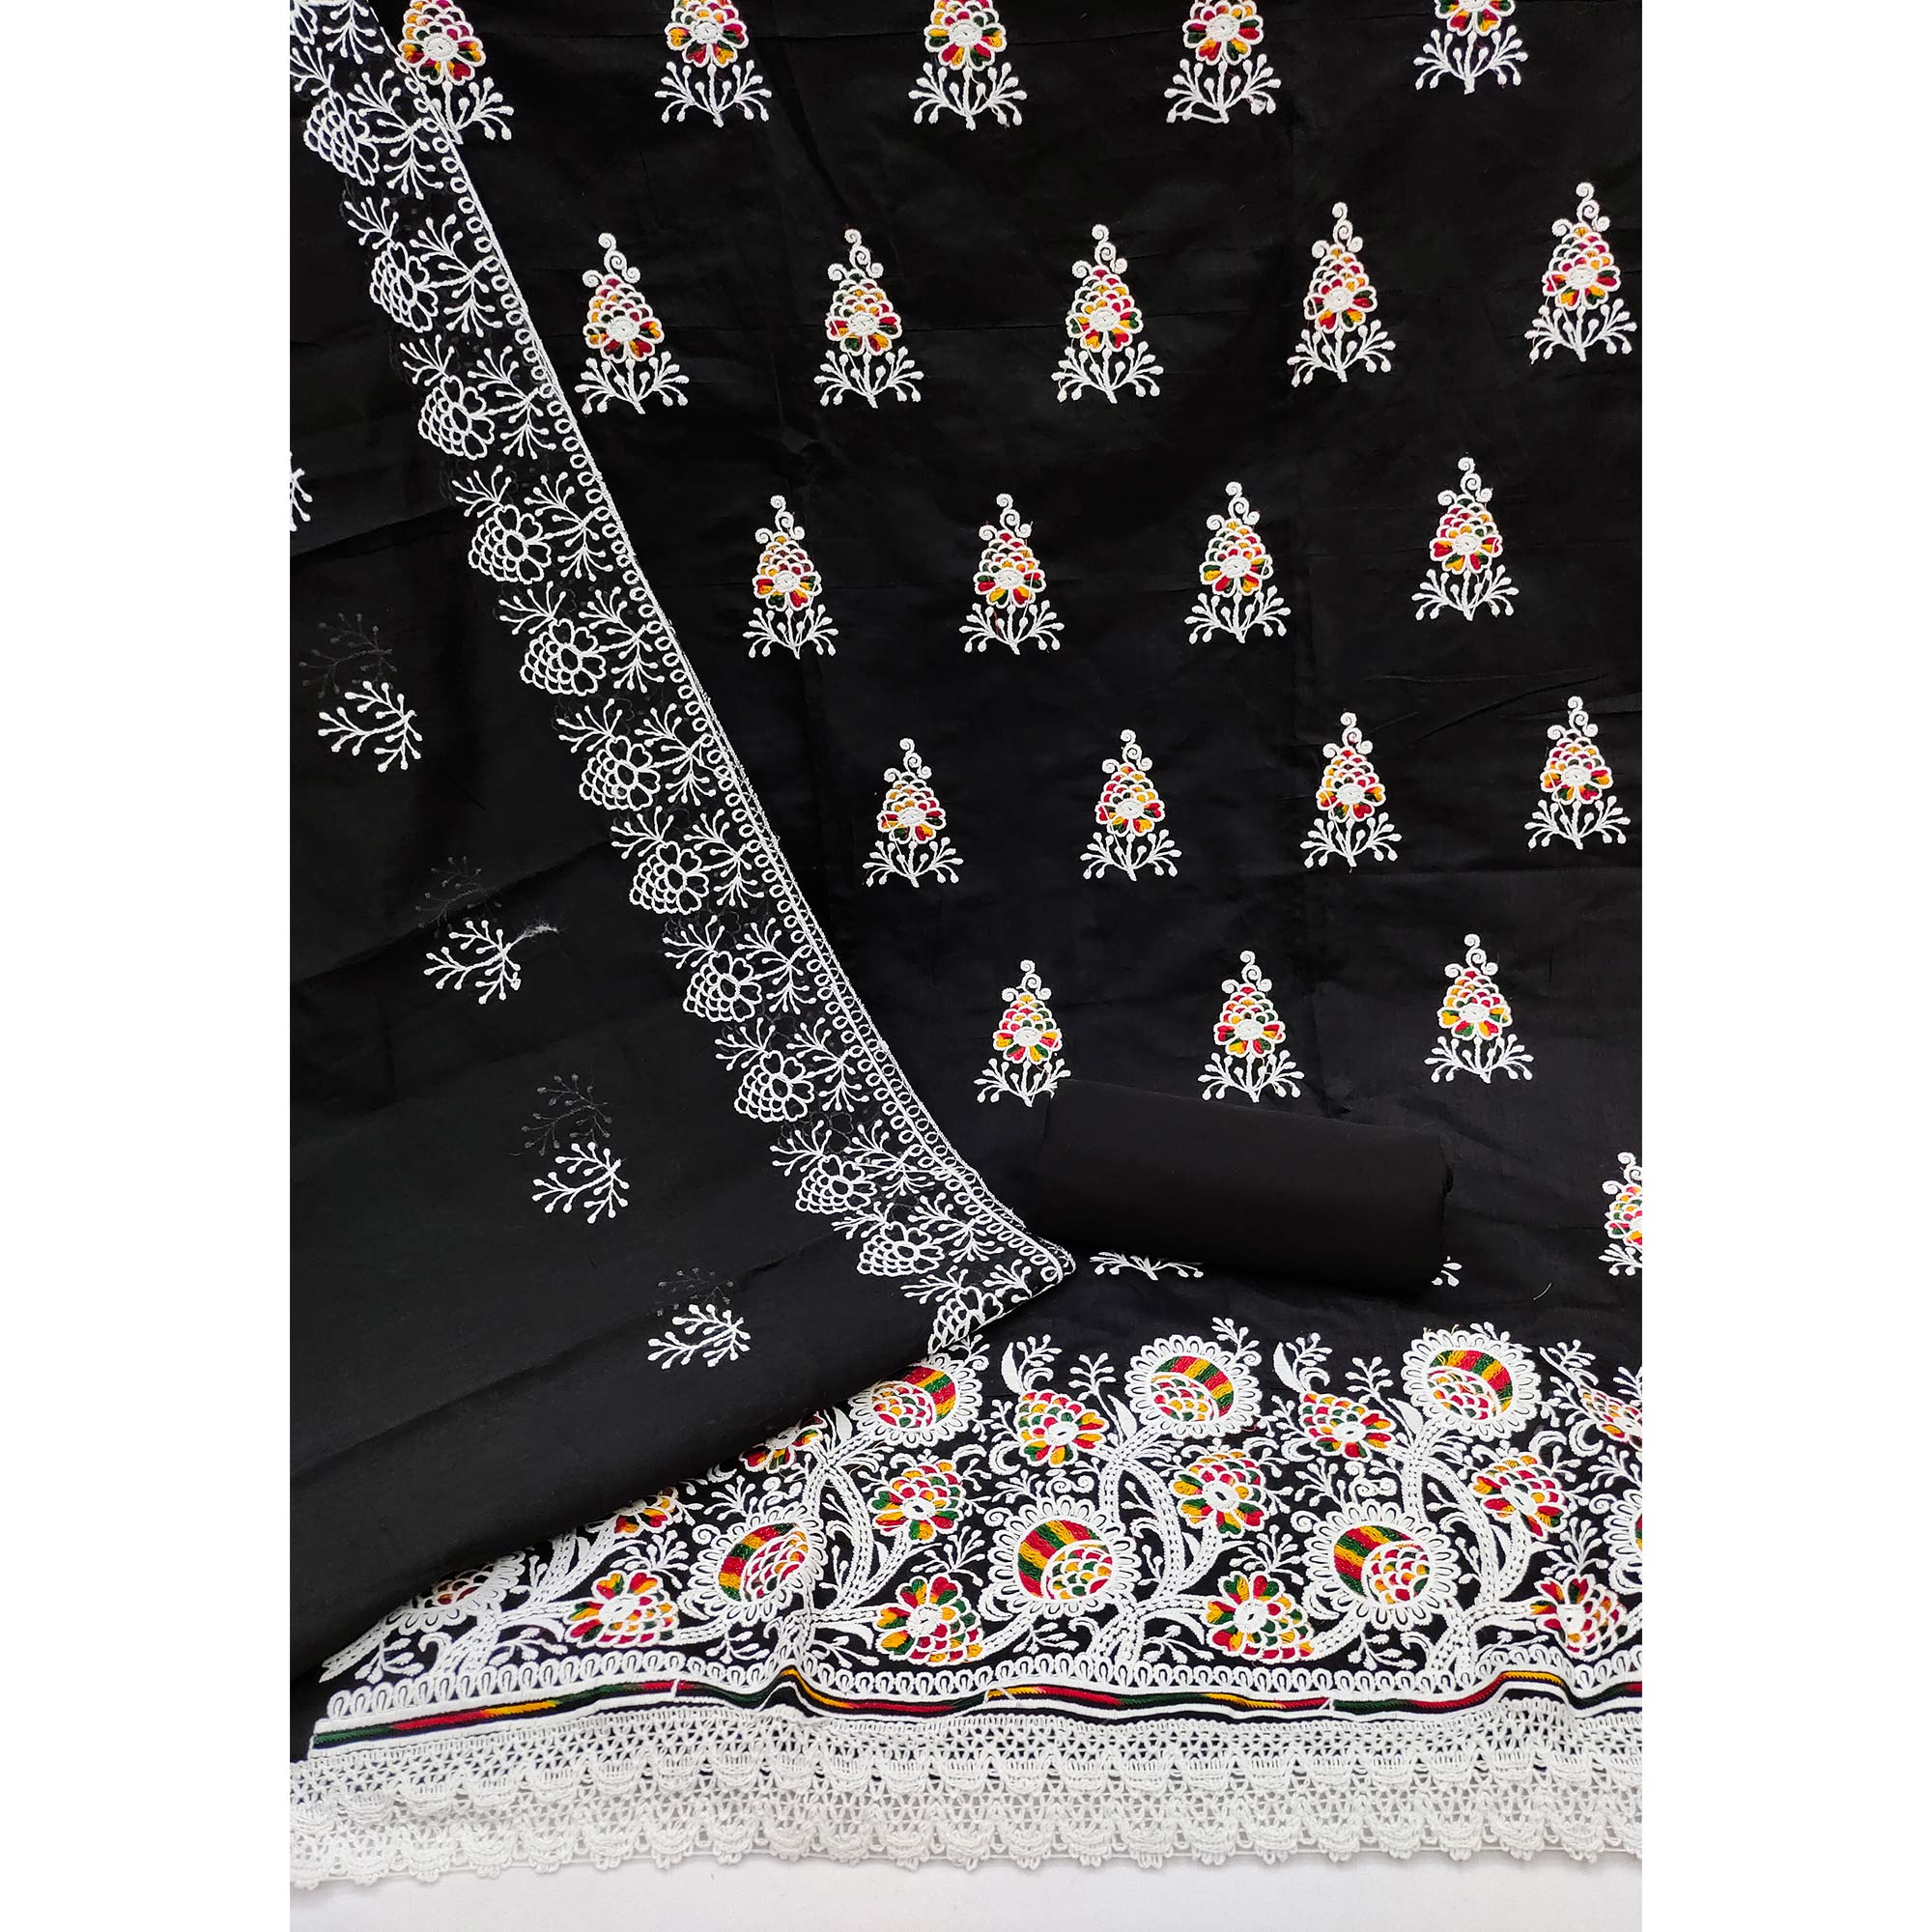 Black Floral Embroidered Chanderi Cotton Dress Material